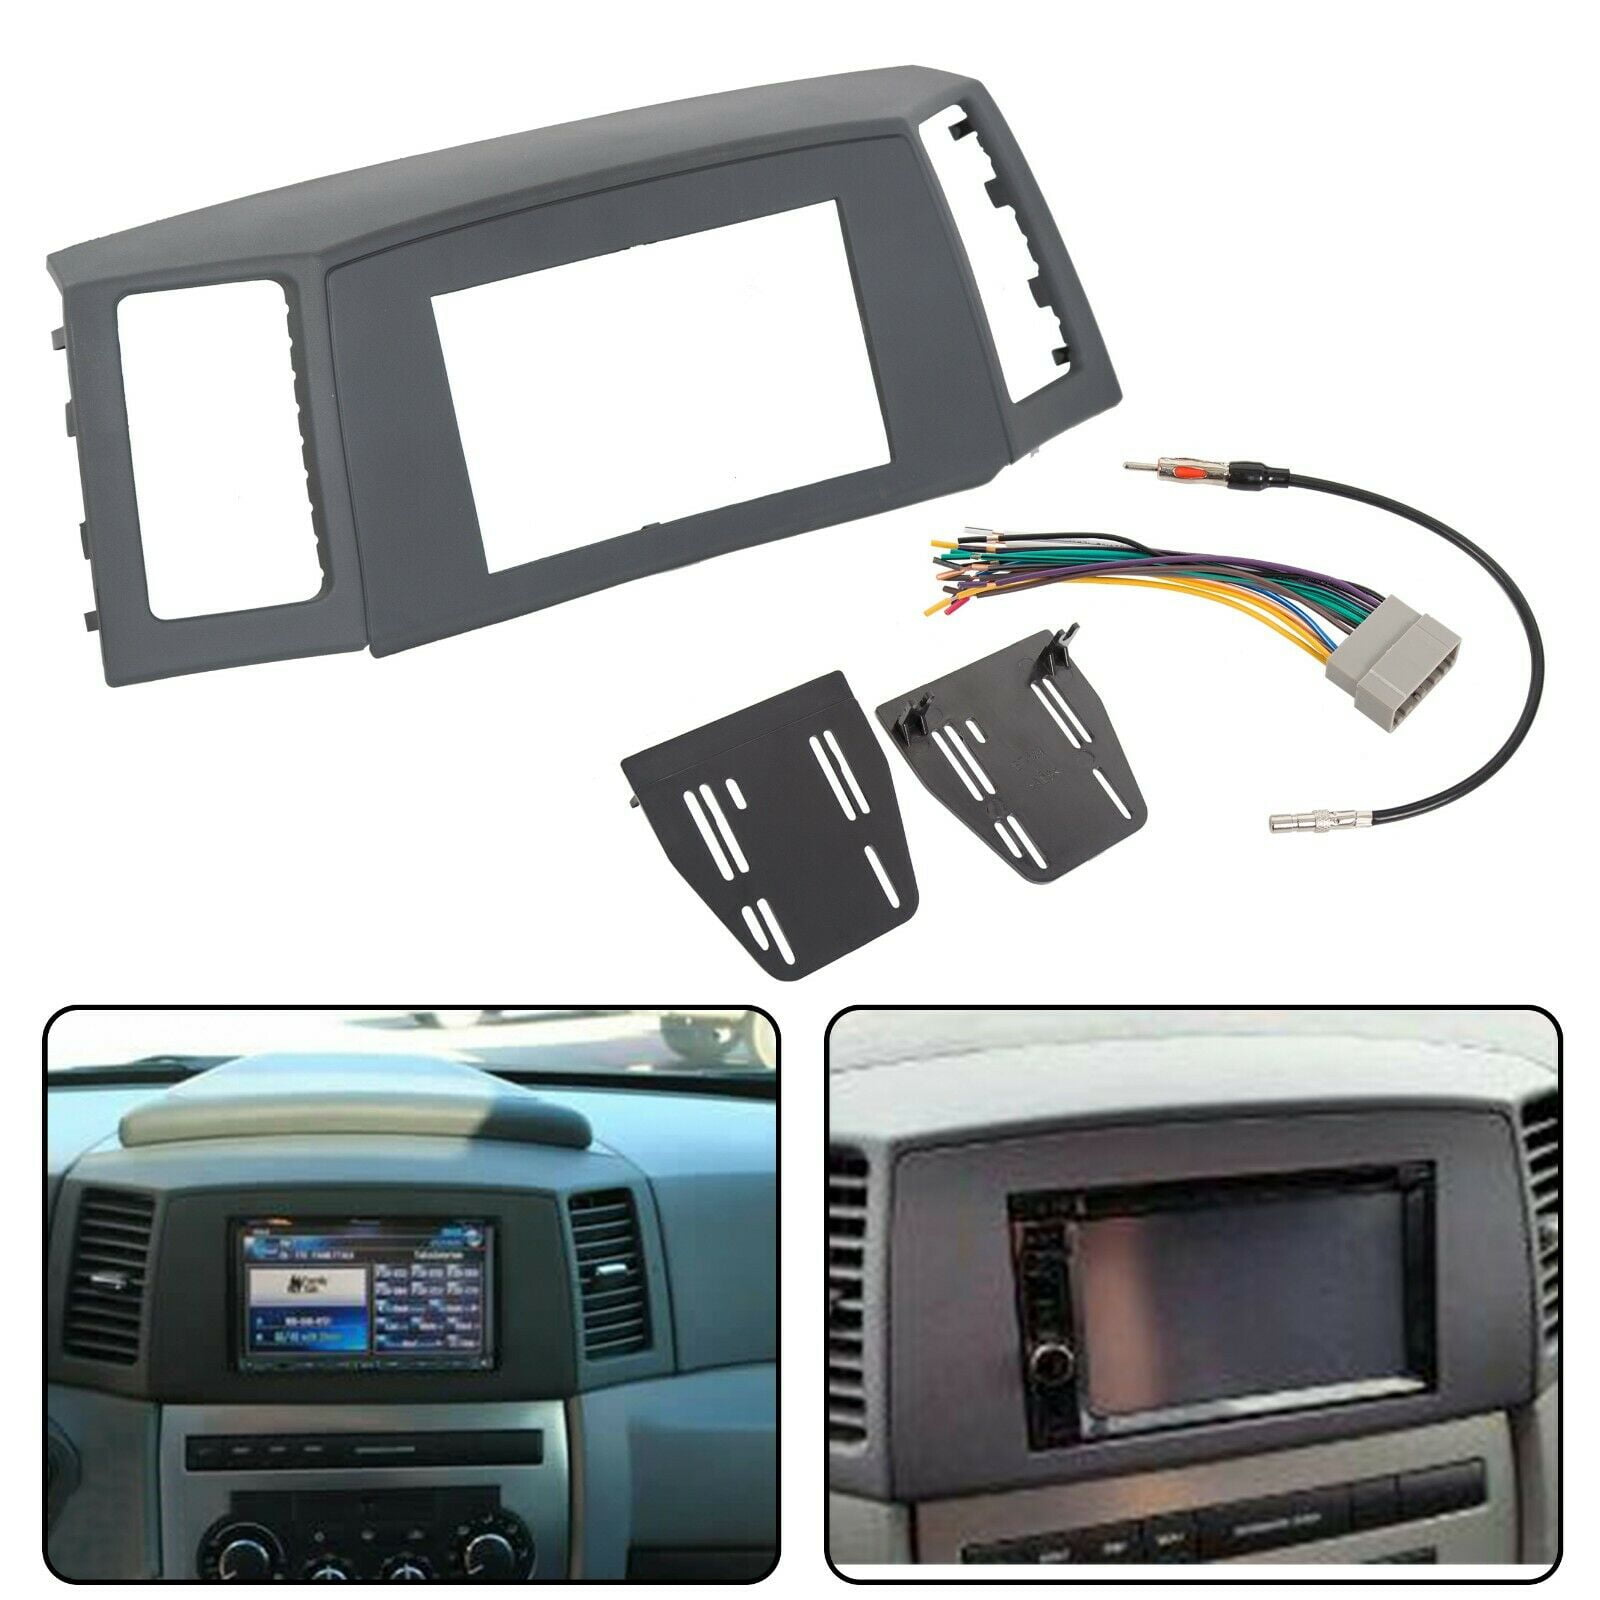 Toyota Yaris 2005 to 2015 how to remove factory radio & fit double din  radio 